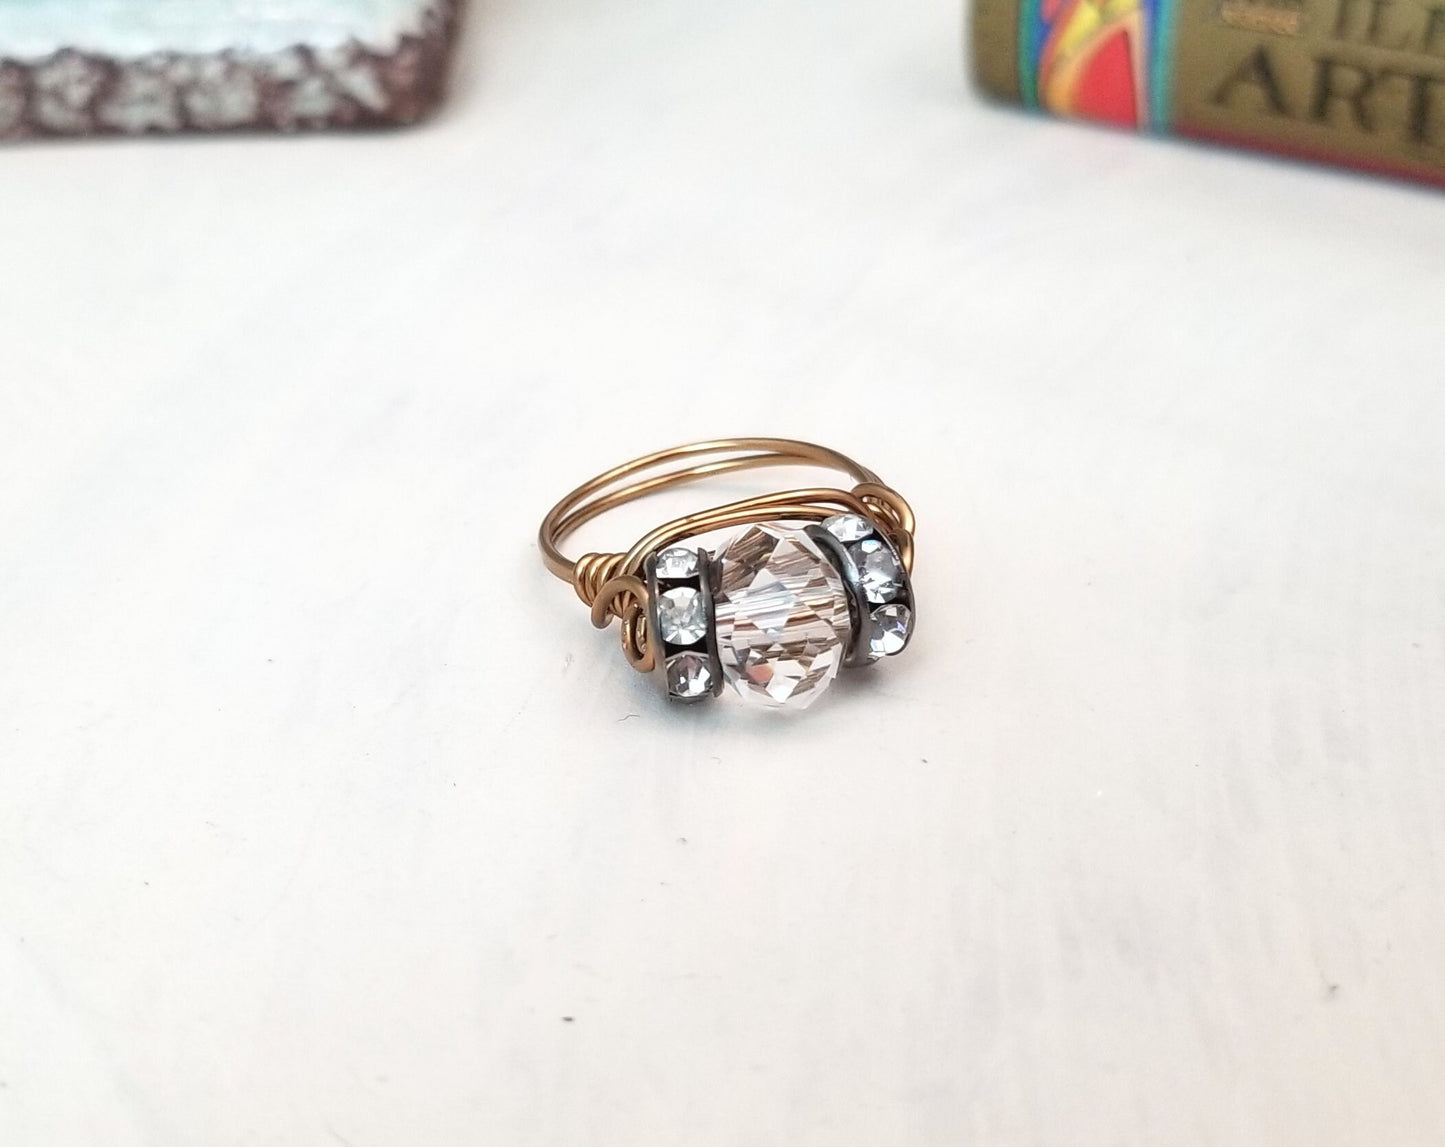 Wire Ring in Clear with Rhinestones, Fairy Tale, Renaissance, Medieval, Choice of Colors and Metals